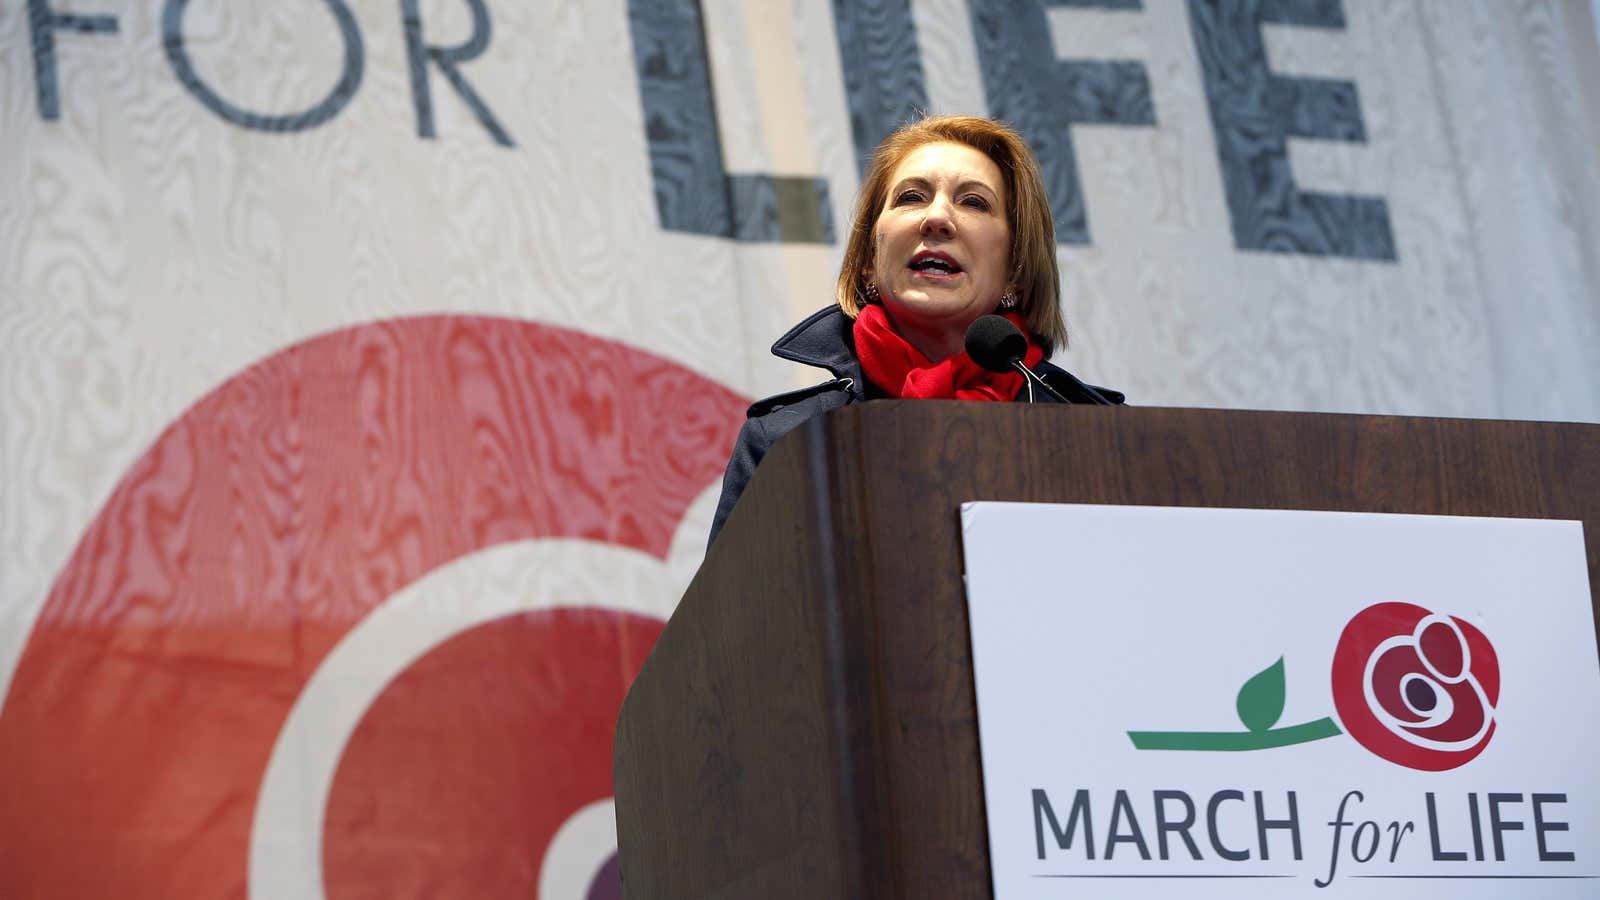 “Here’s what I know: Planned Parenthood has been trafficking in body parts.” – Carly Fiorina